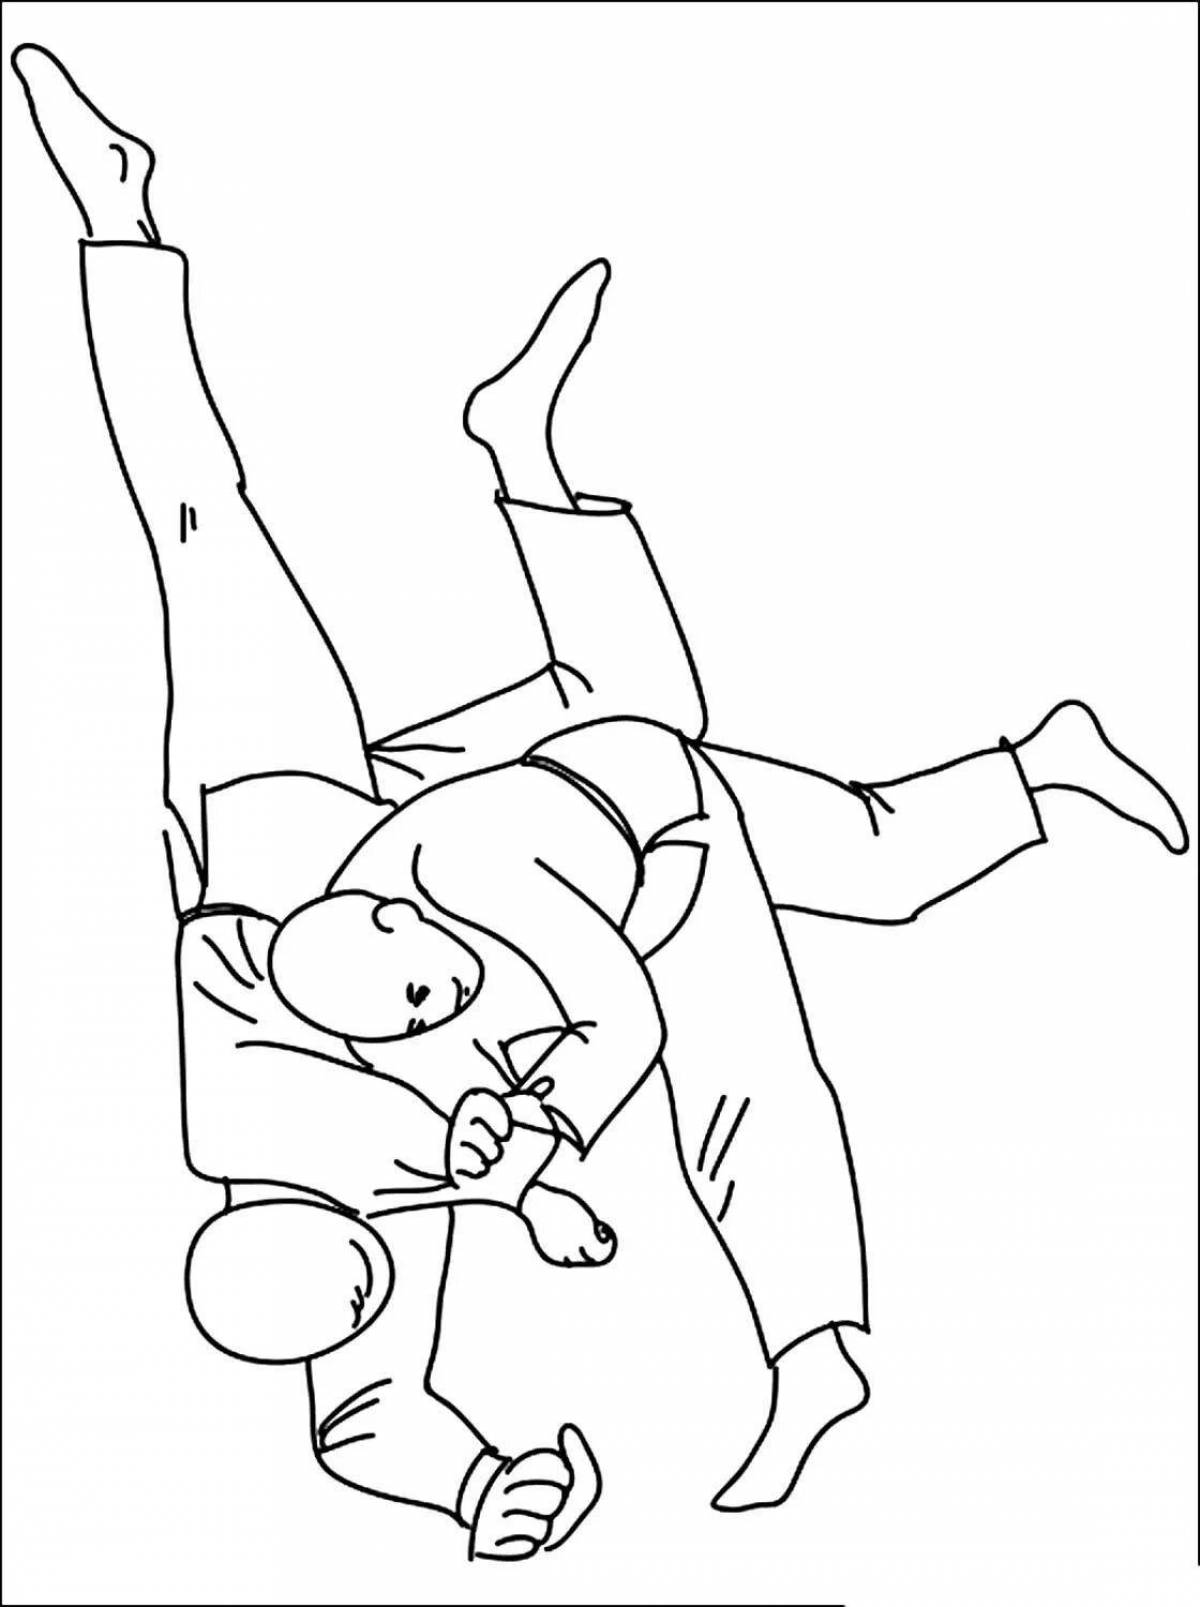 Nimble wrestler coloring pages